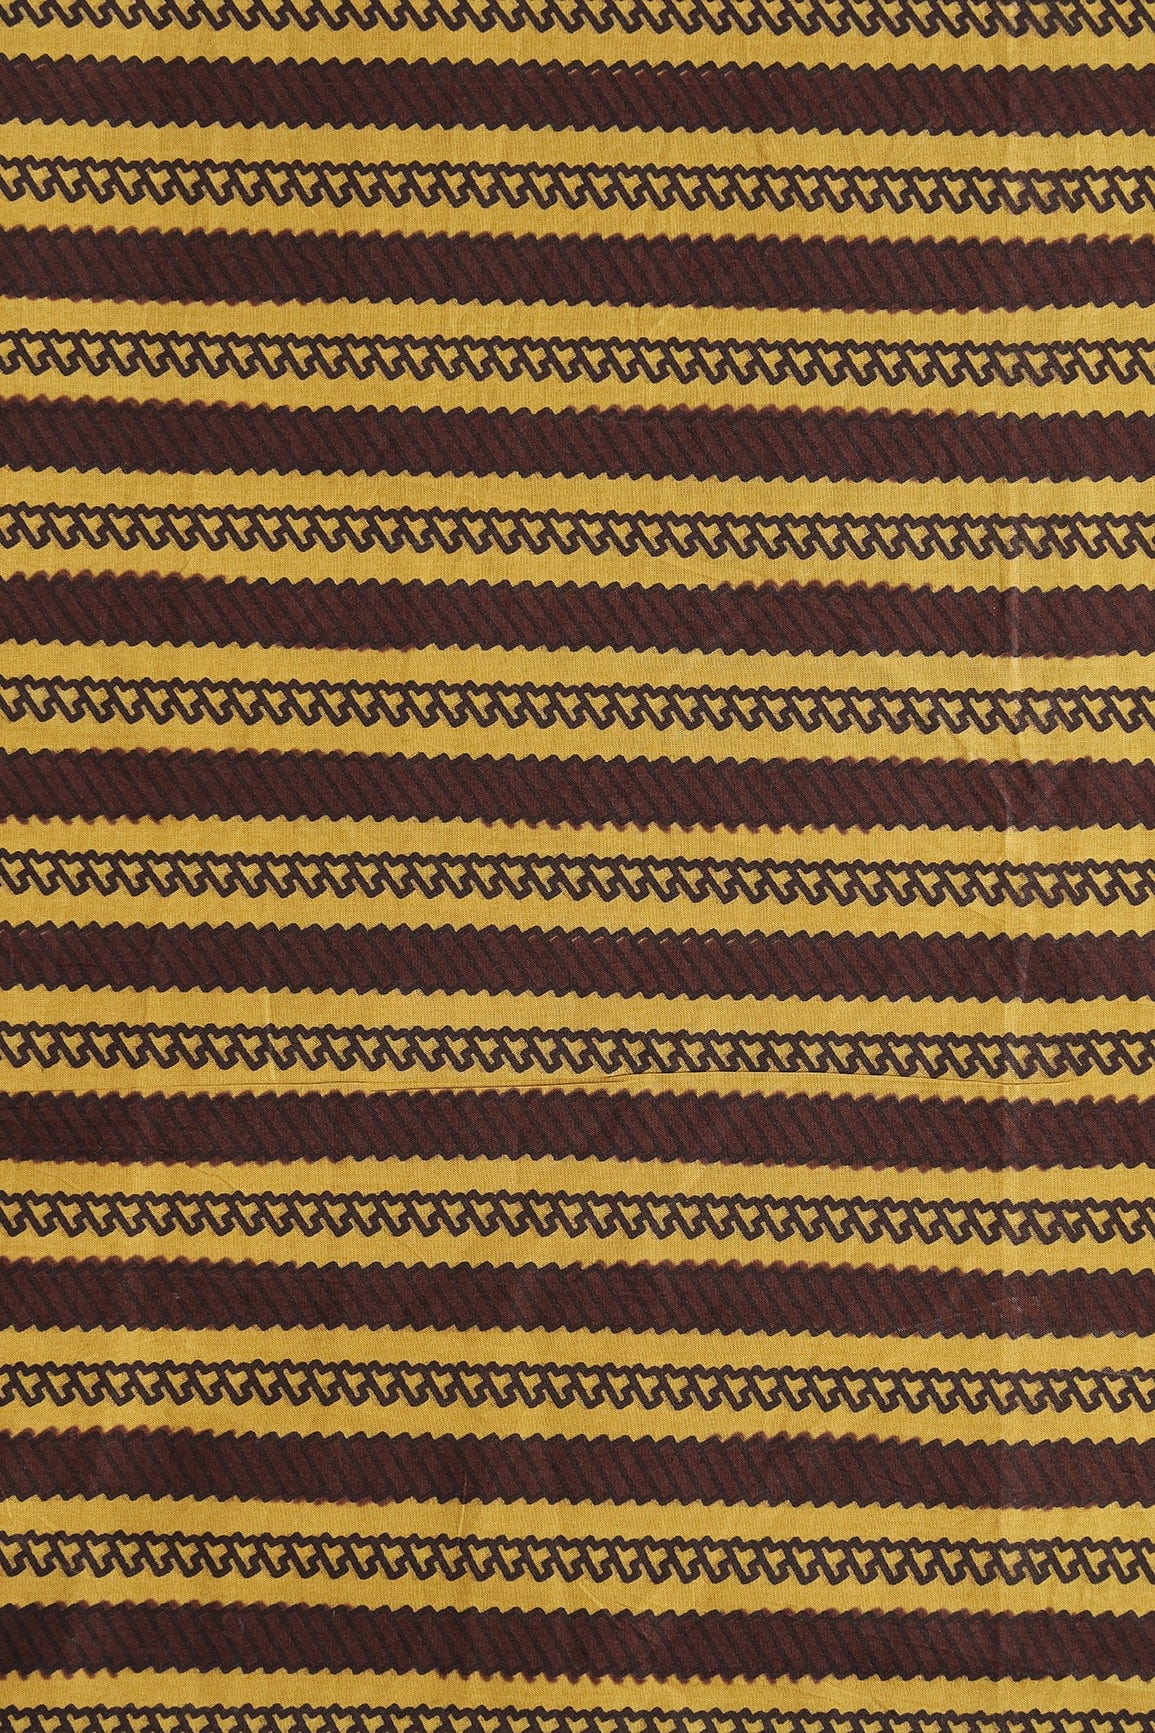 doeraa Prints Mustard And Brown Stripes On Pure Cotton Fabric